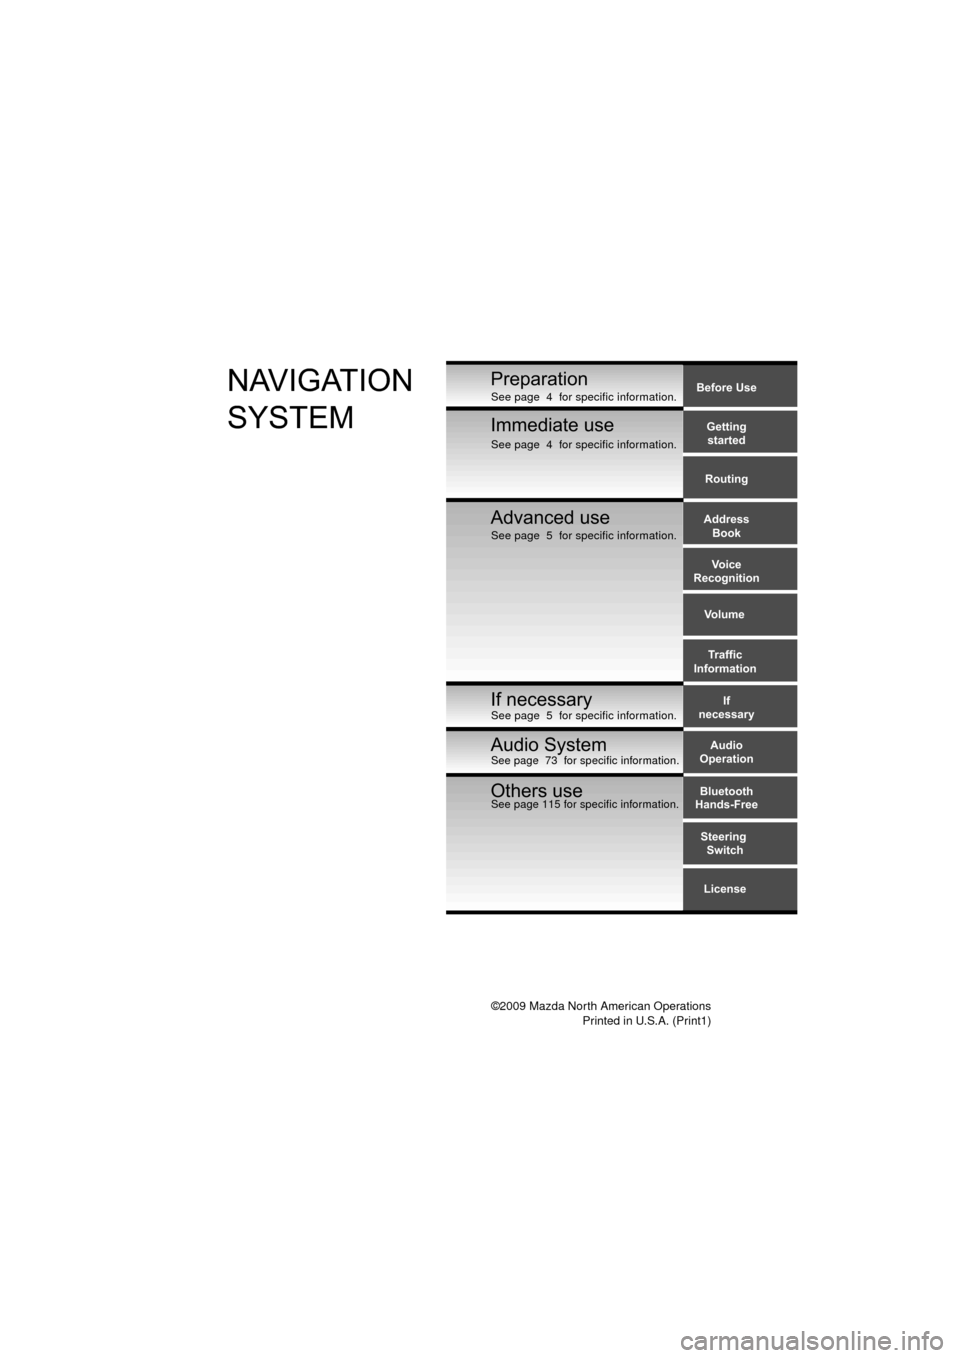 MAZDA MODEL 6 2010  Navigation Manual (in English) ©2009 Mazda North American OperationsPrinted in U.S.A. (Print1)
Before Use
Gettingstarted
Routing
Address Book
Voice 
Recognition
Volume
If
necessary Traffic
InformationPreparationNAVIGATION 
SYSTEM
